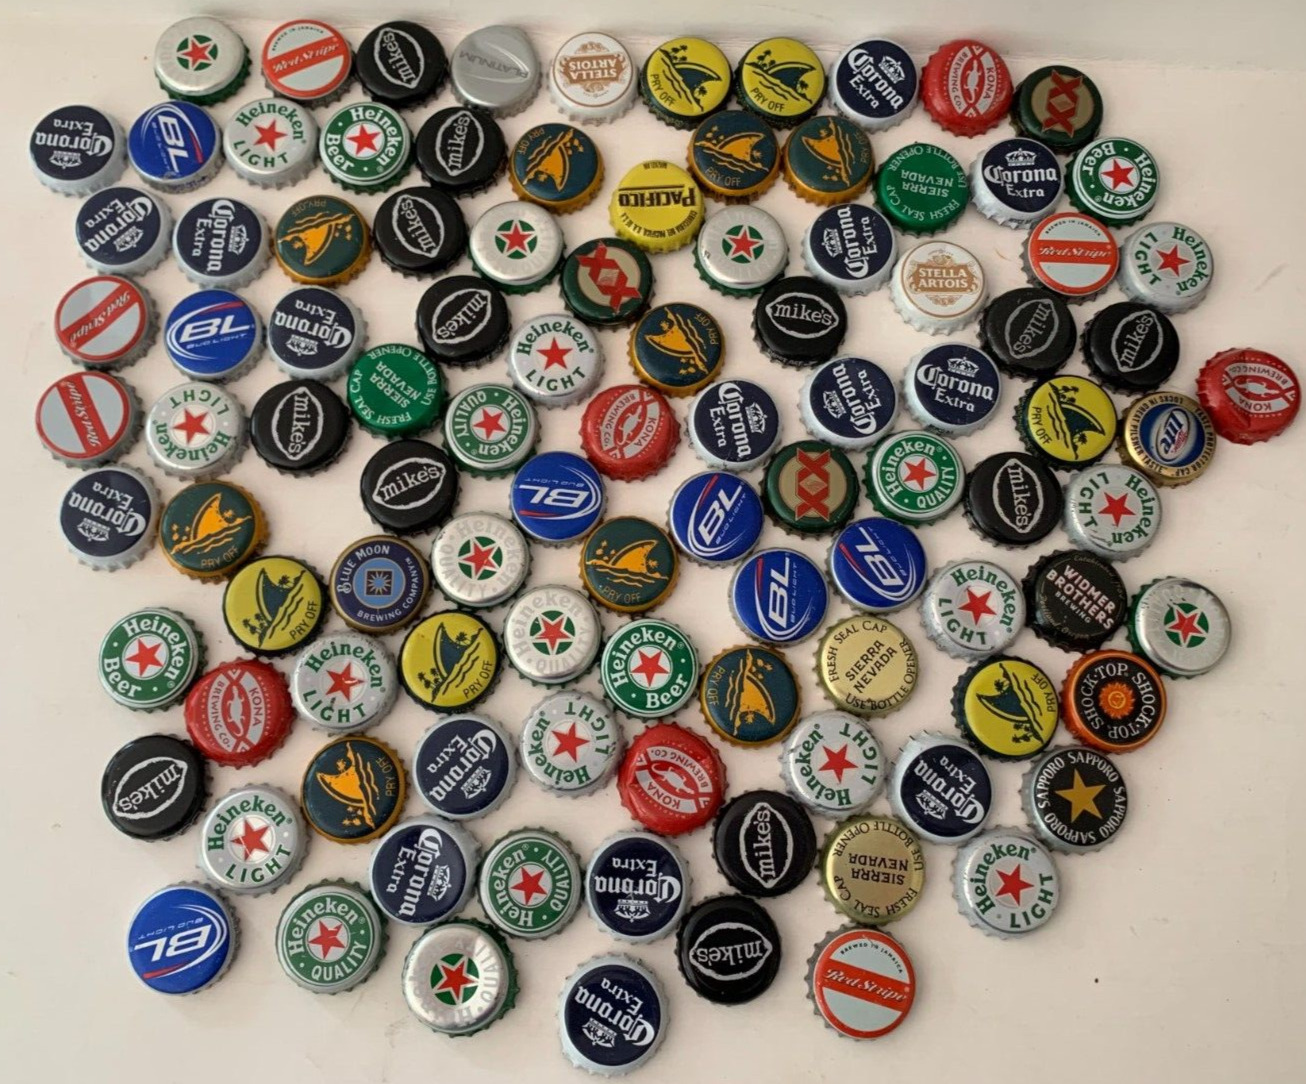 LOT of 100+ Beer Bottle Caps - Large Variety including Craft Beers